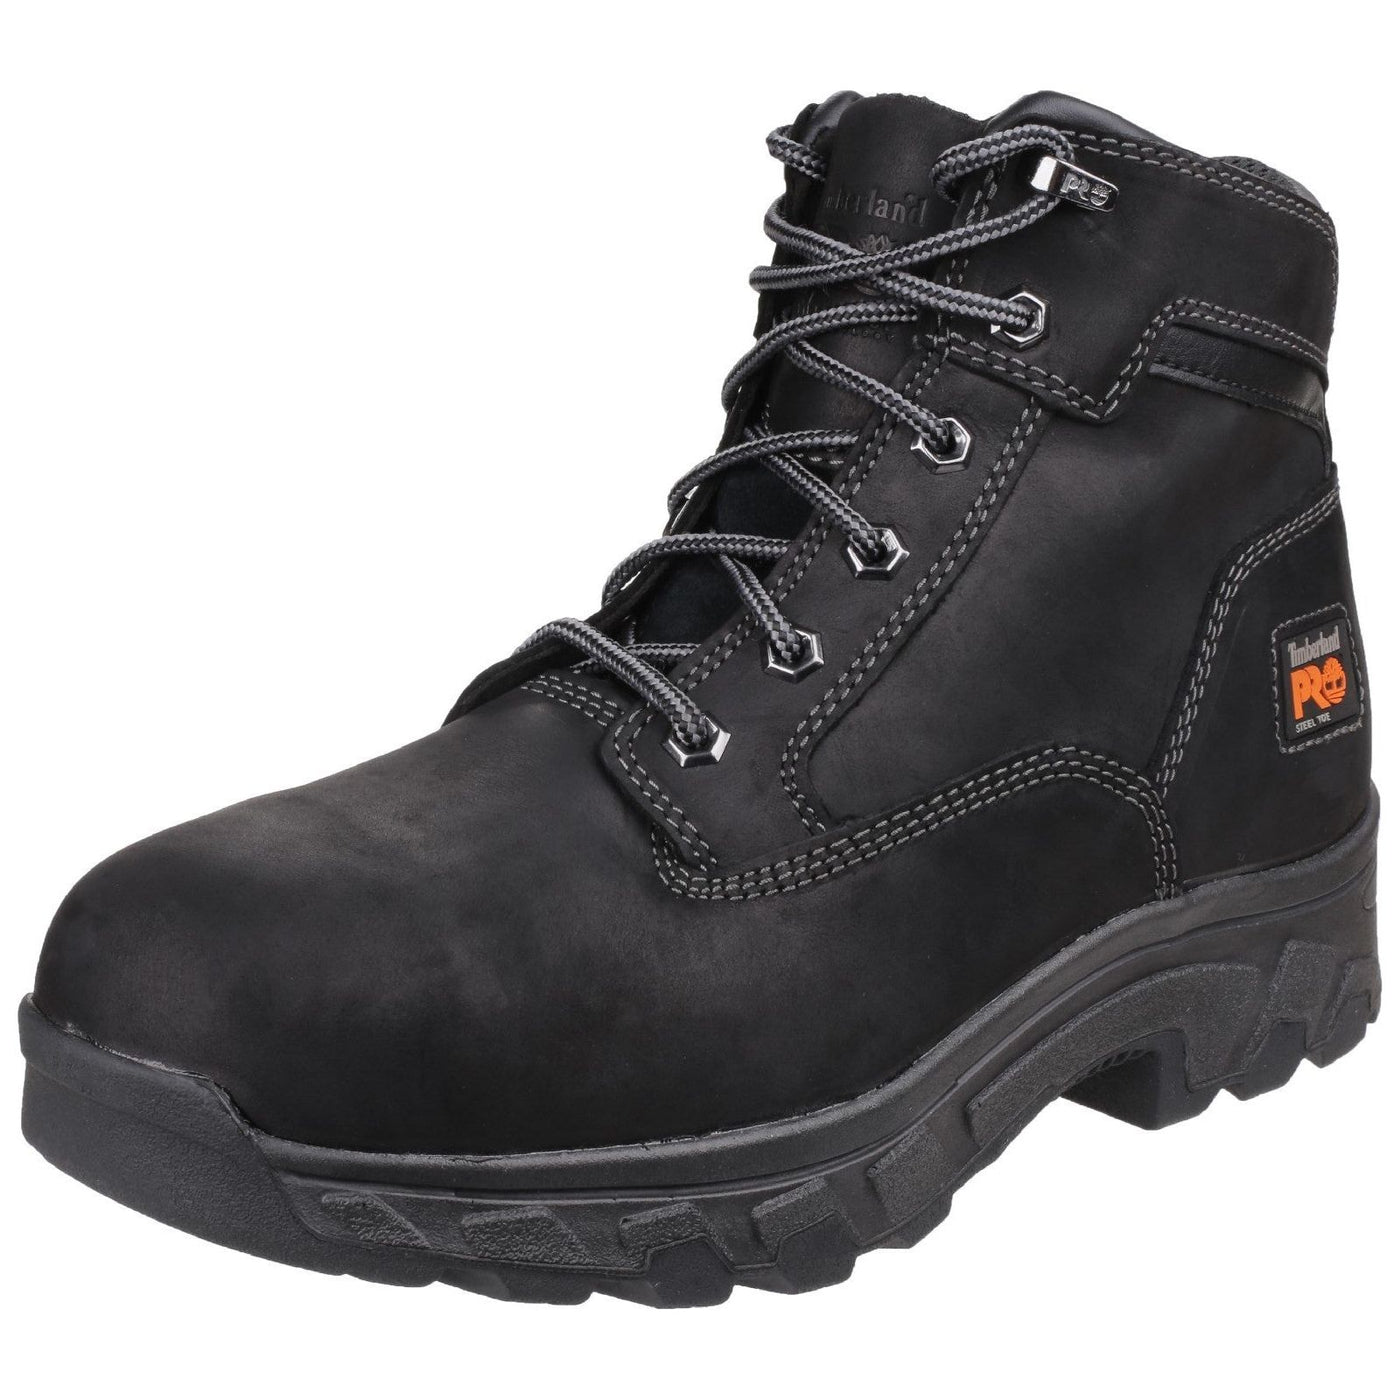 Timberland Workstead Safety Boots - Mens